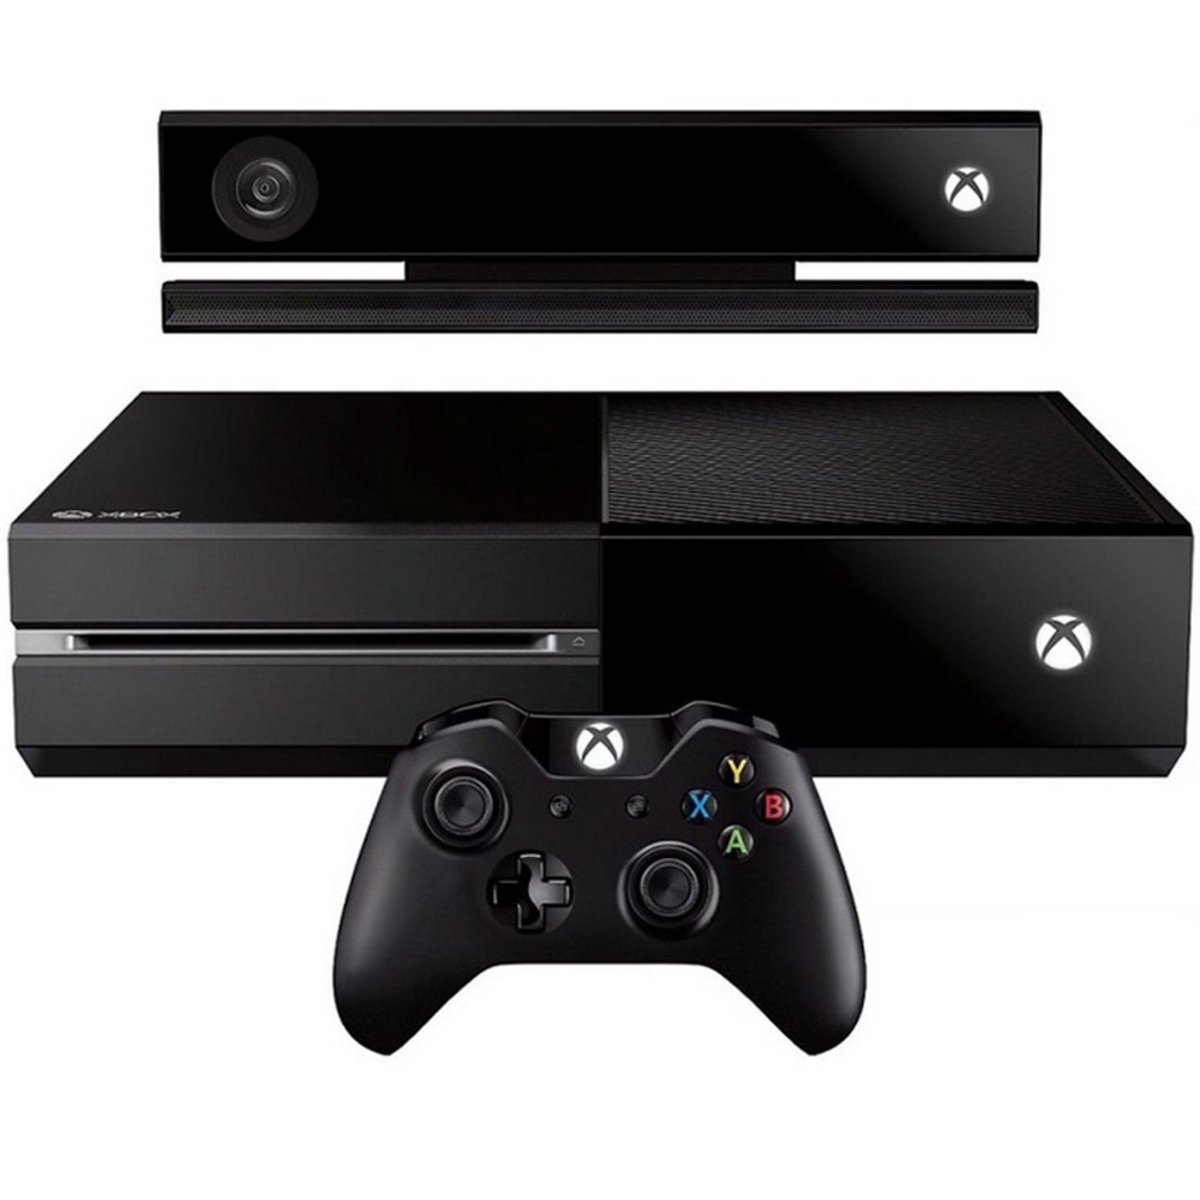 Xbox One Console 500GB With Kinect 7UV-00116 + Game DLC - Loco Cycle + Halo : Spartan Assault+ Max: